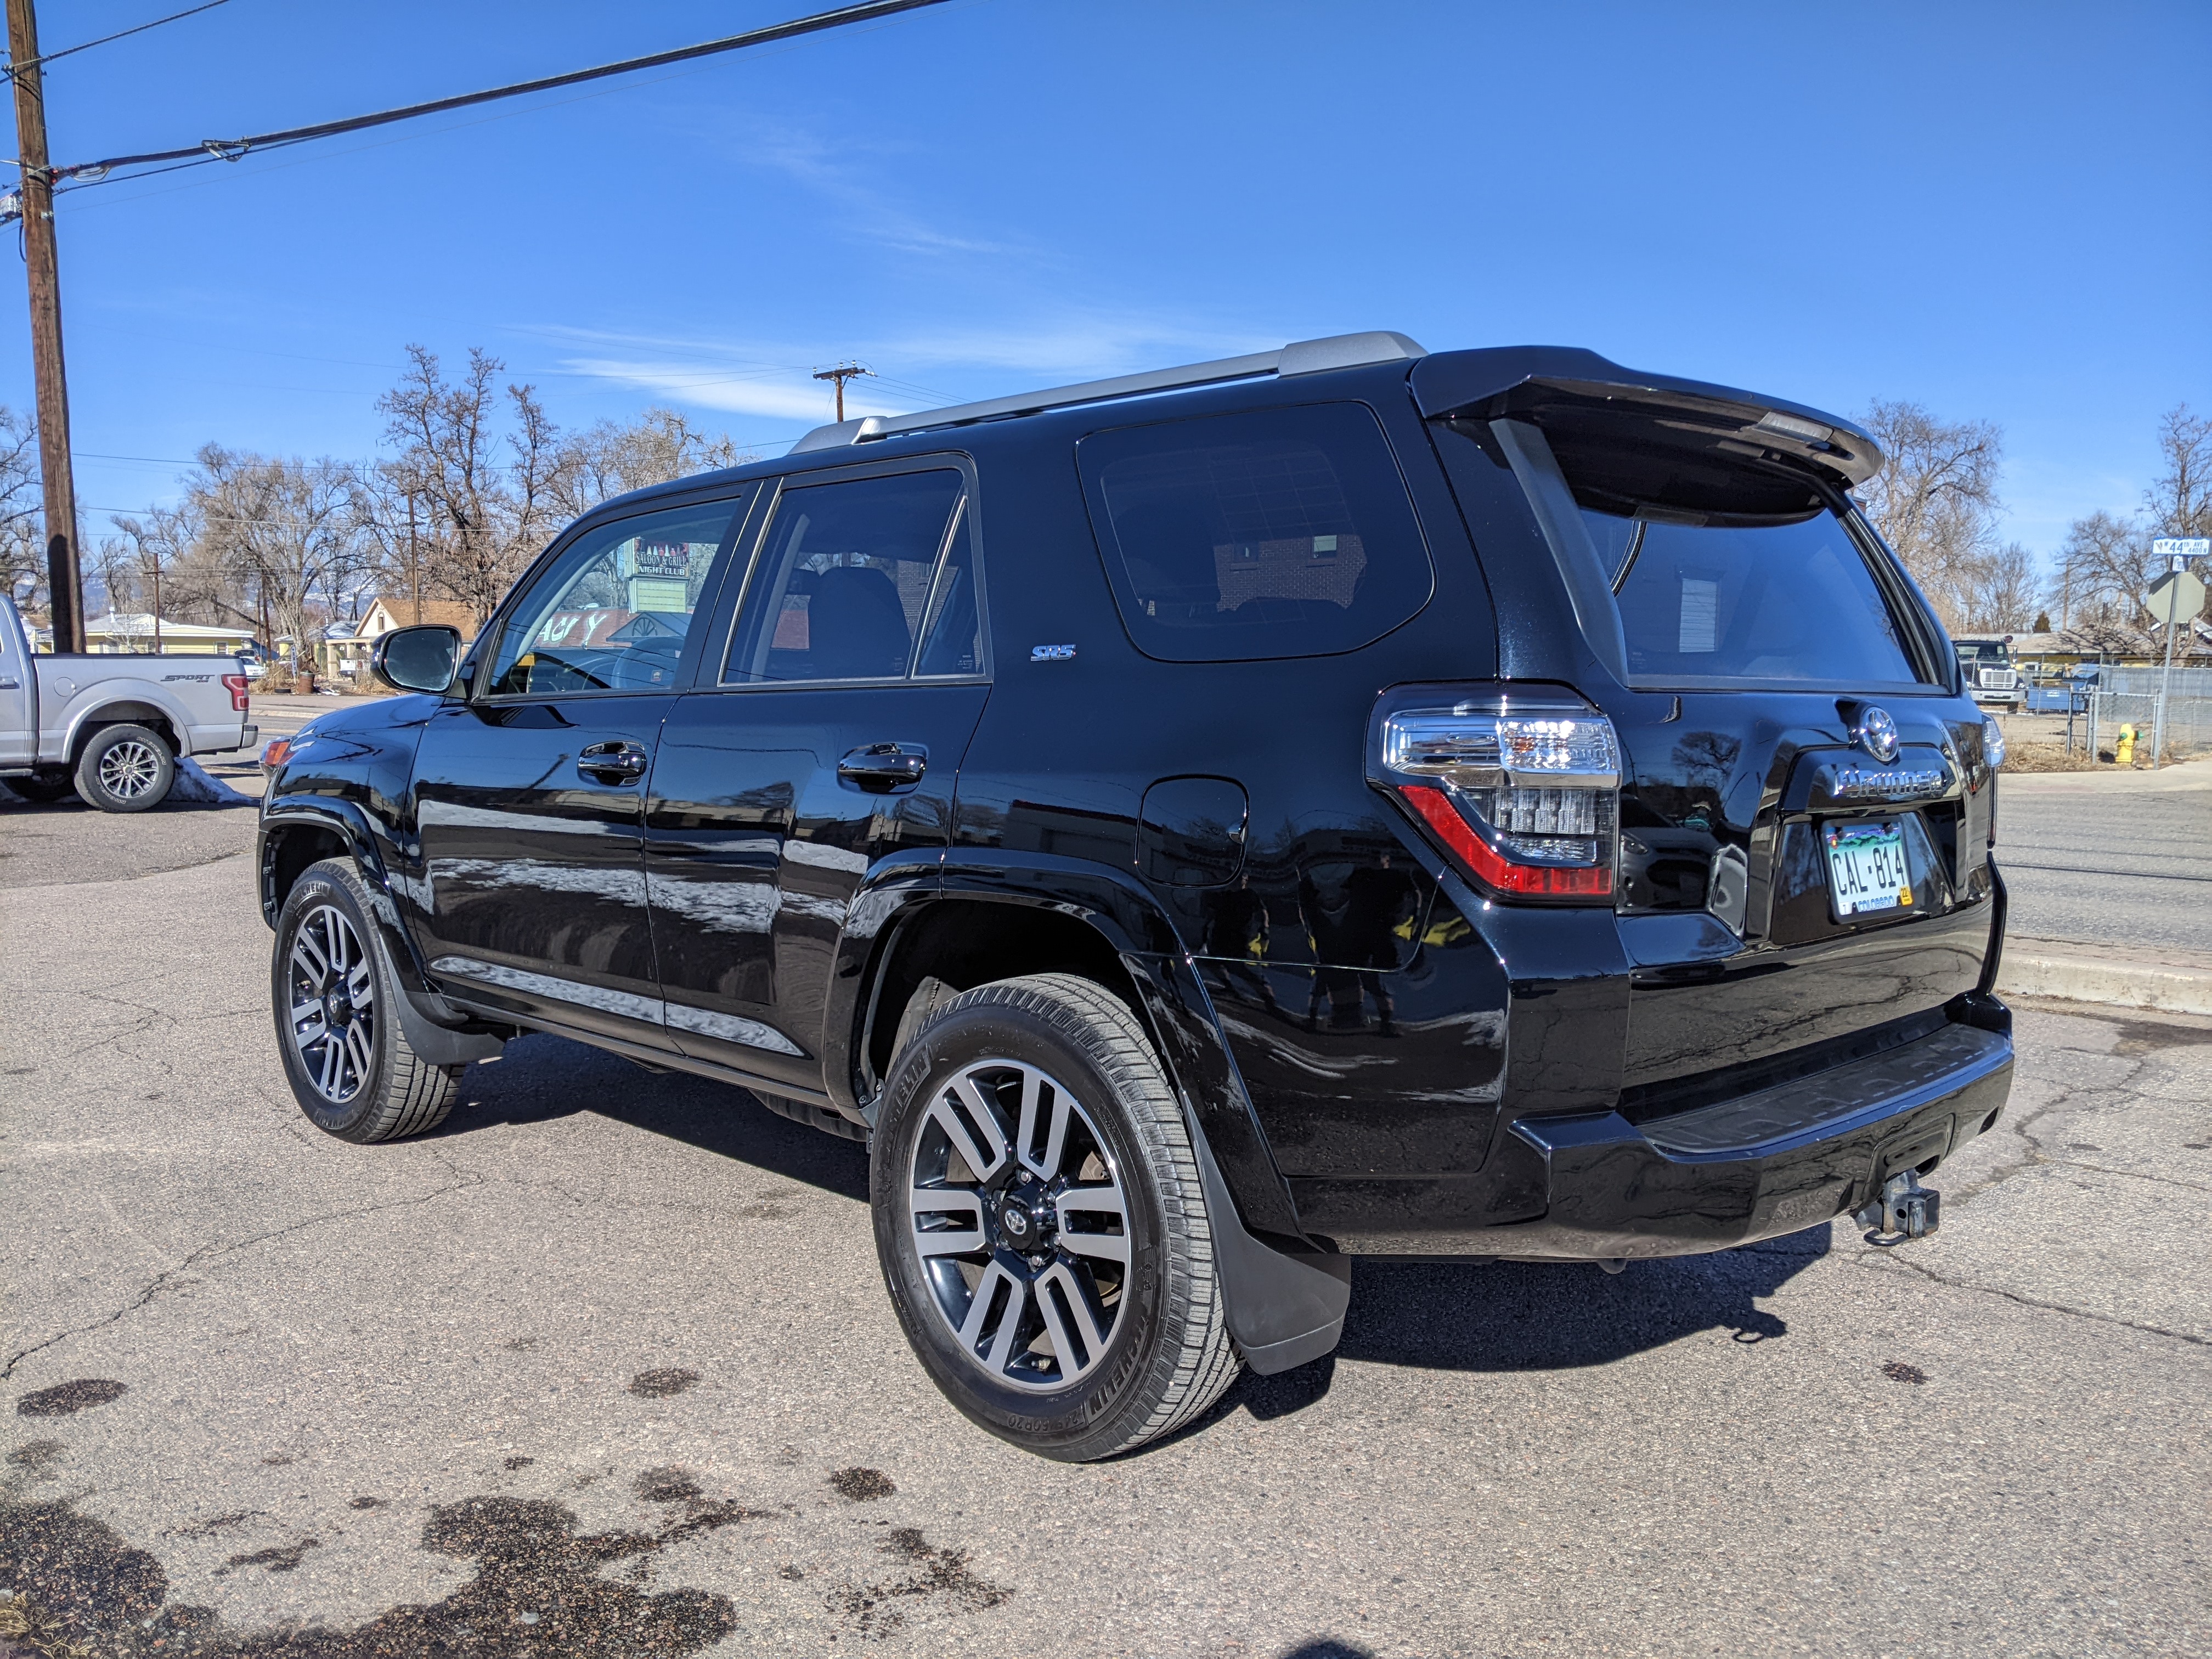 Ceramic coated 2018 Toyota 4Runner SR5 with Ceramic Pro Silver Package.